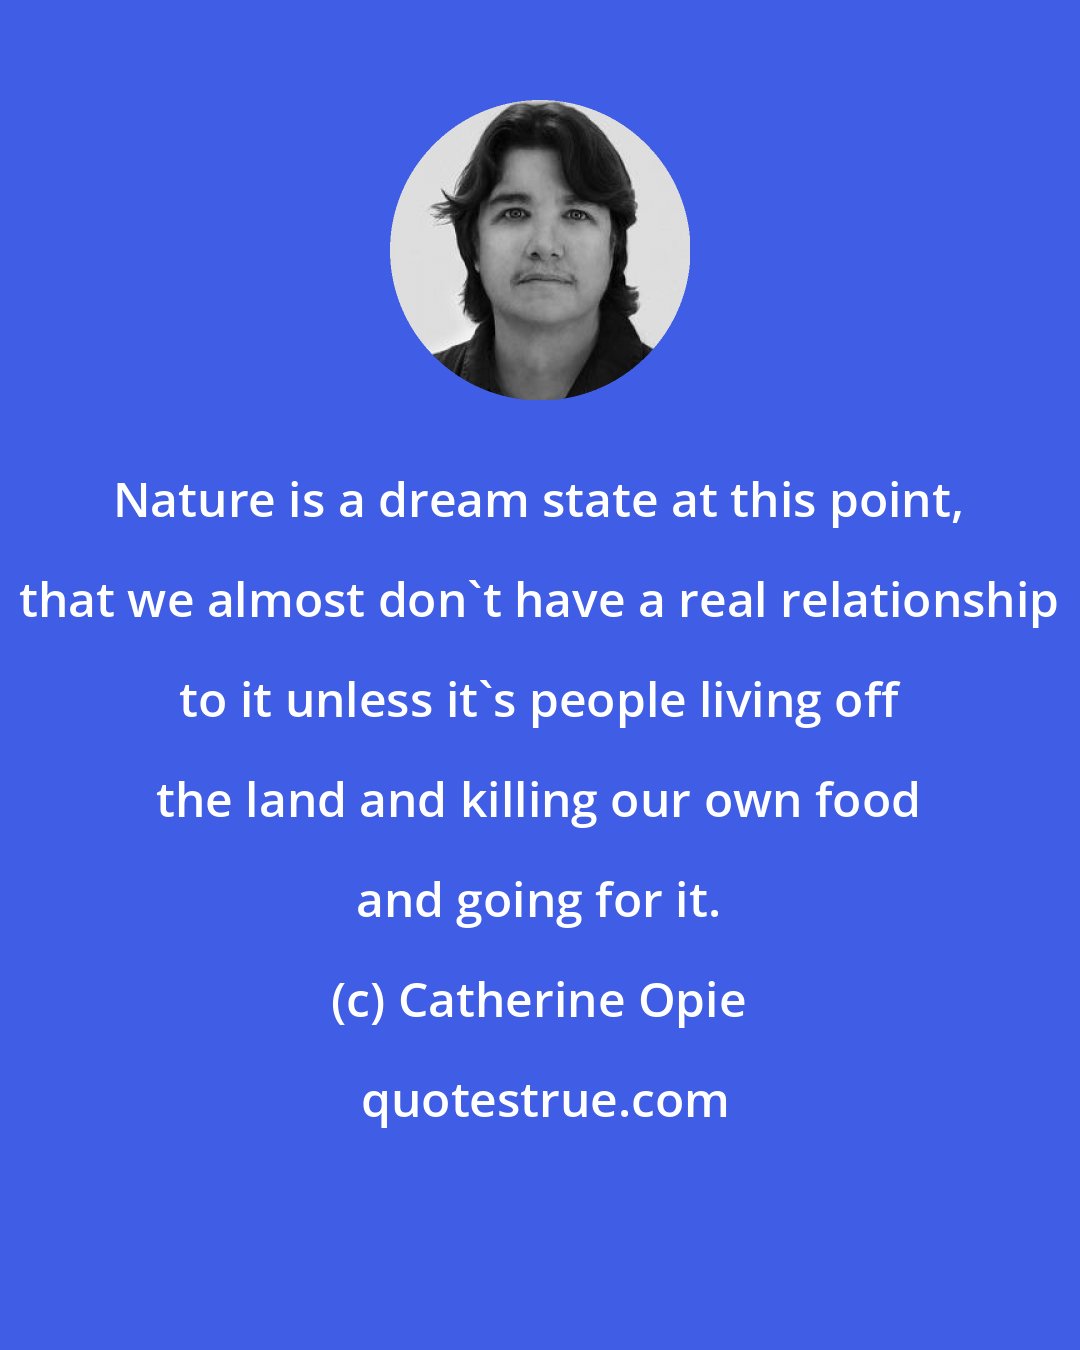 Catherine Opie: Nature is a dream state at this point, that we almost don't have a real relationship to it unless it's people living off the land and killing our own food and going for it.